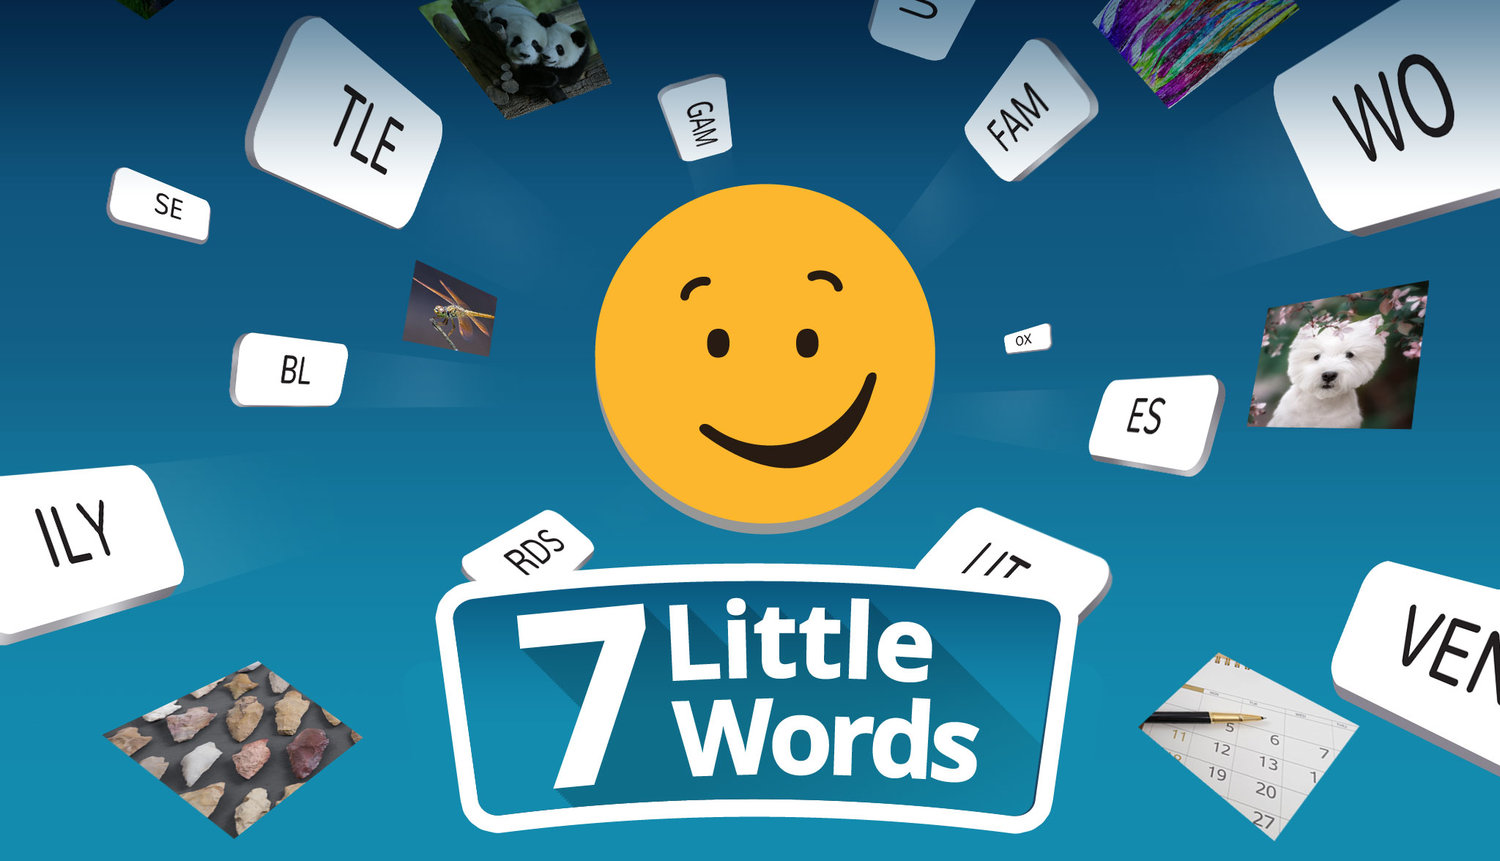 7 Little Words Daily January 15 2022 Answers